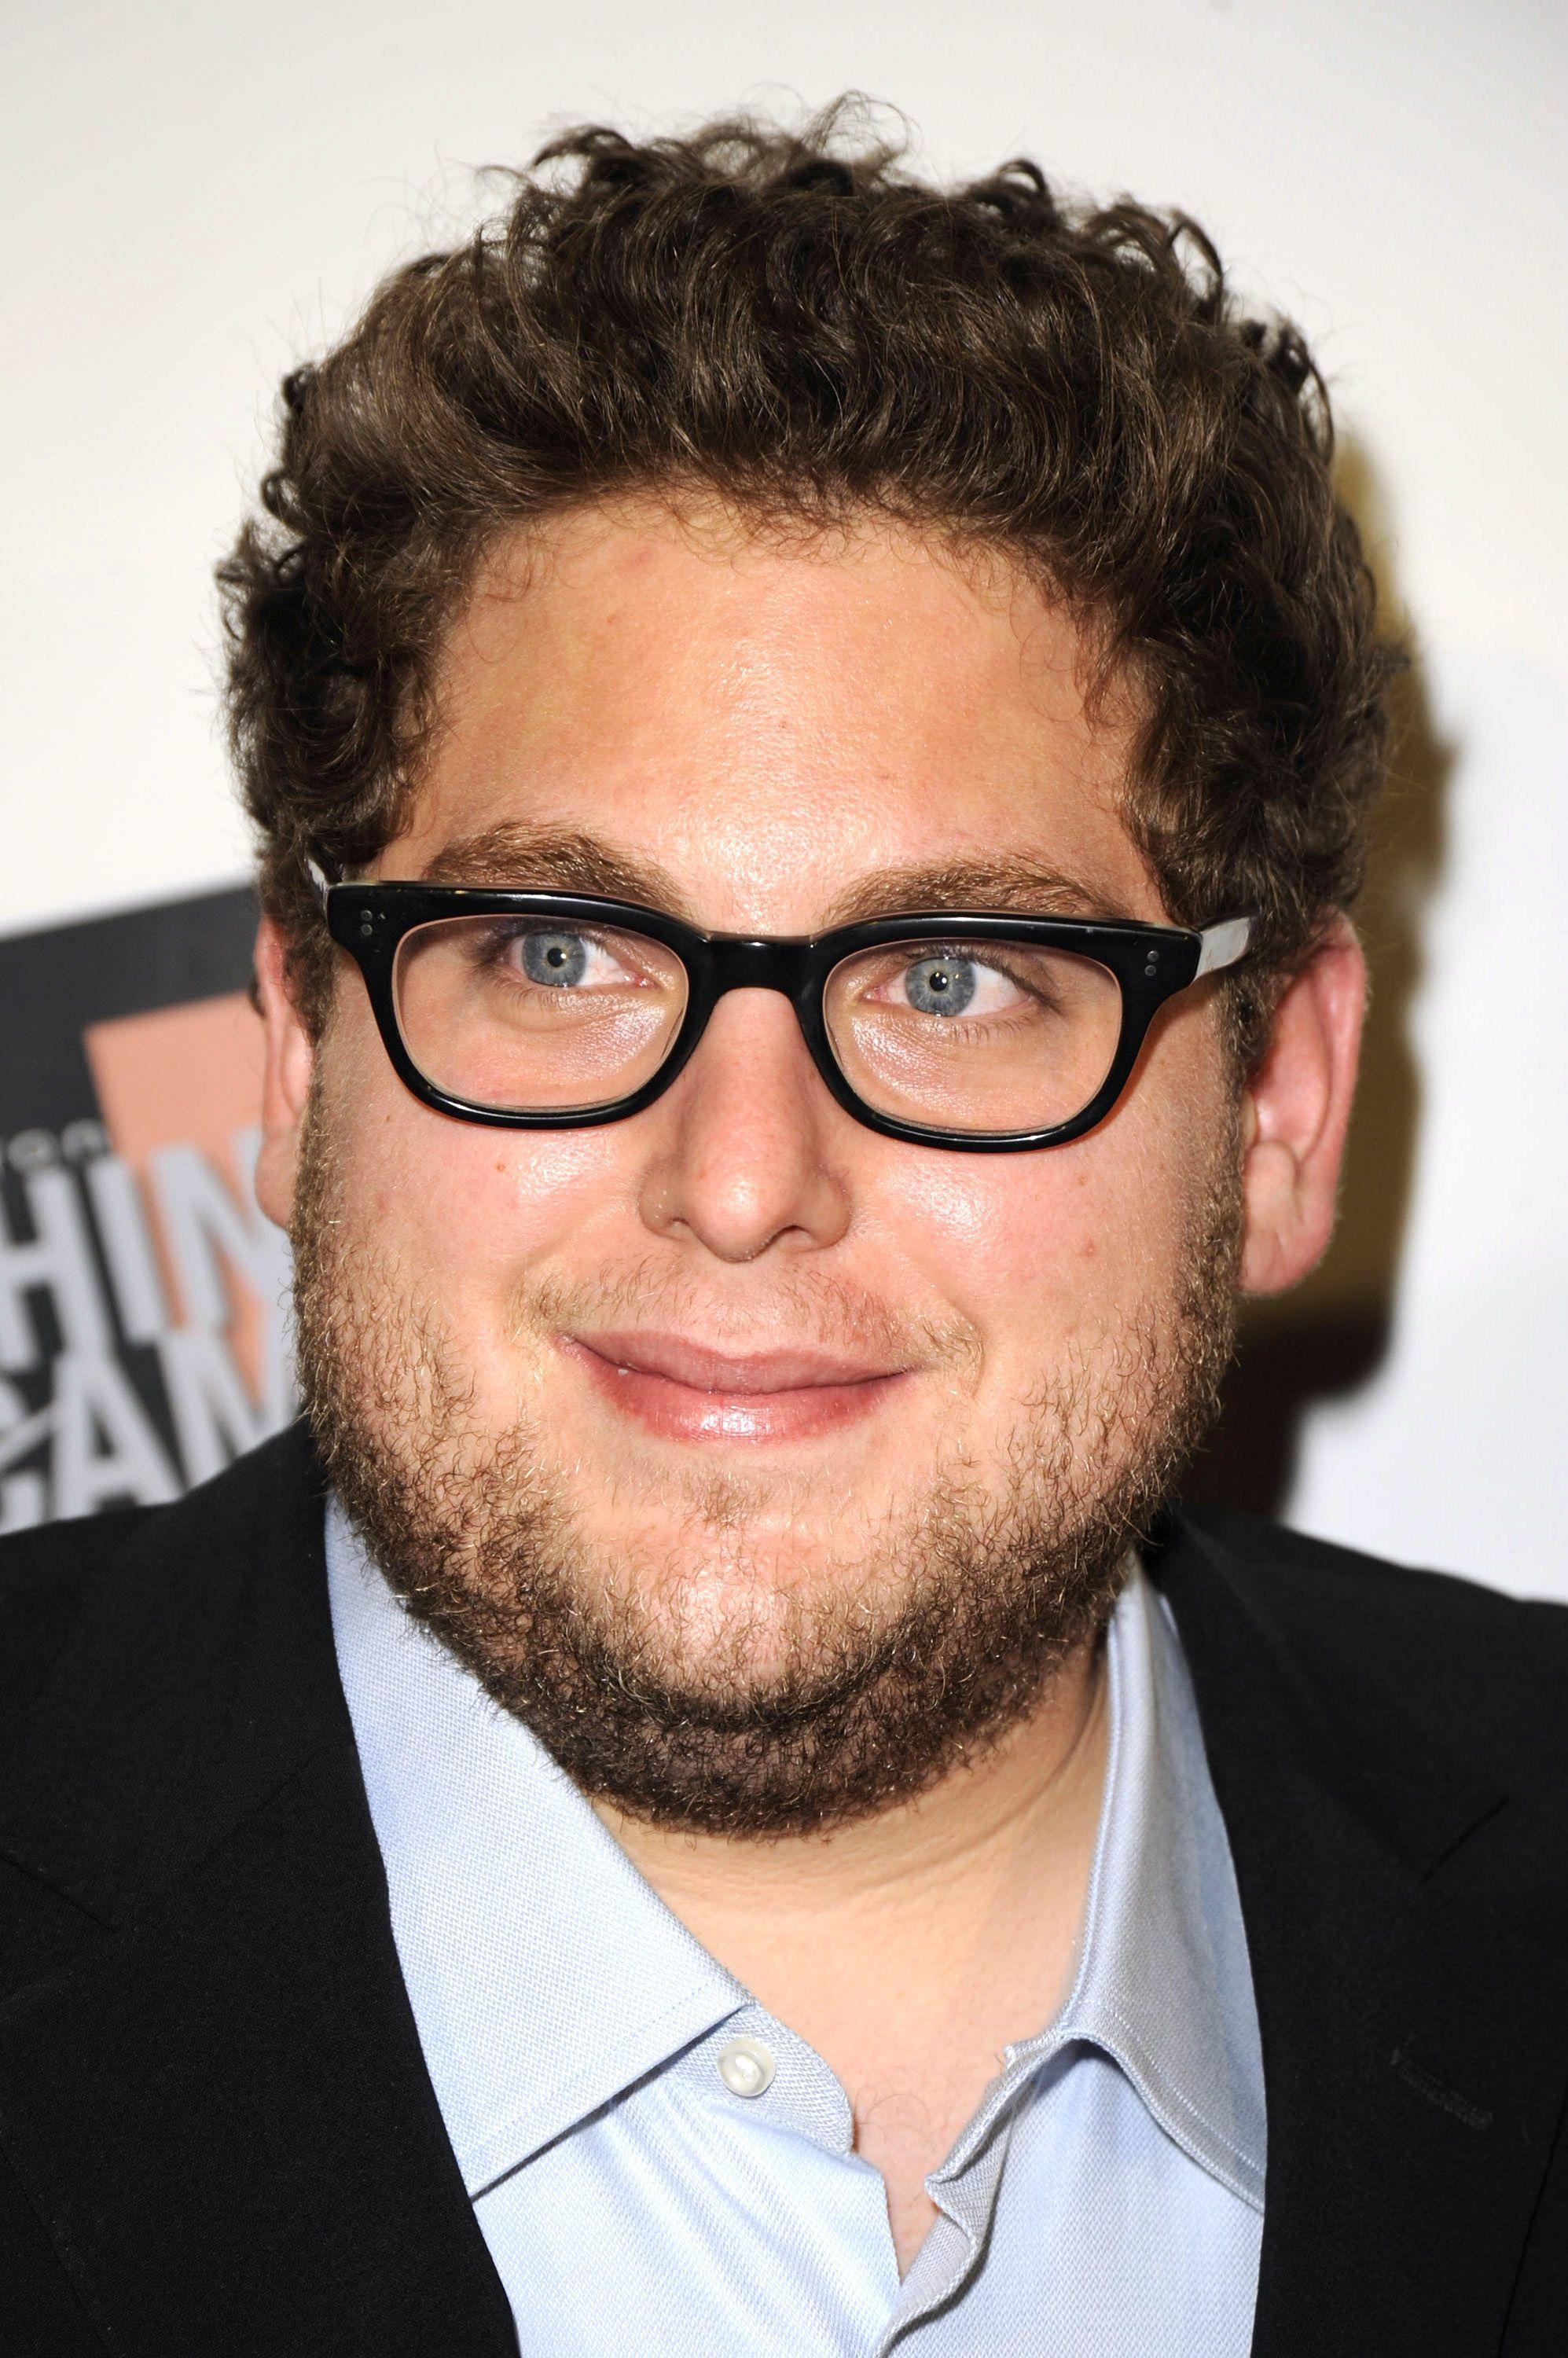 Jonah Hill <3 xoxo Probably one of the only men that I believe